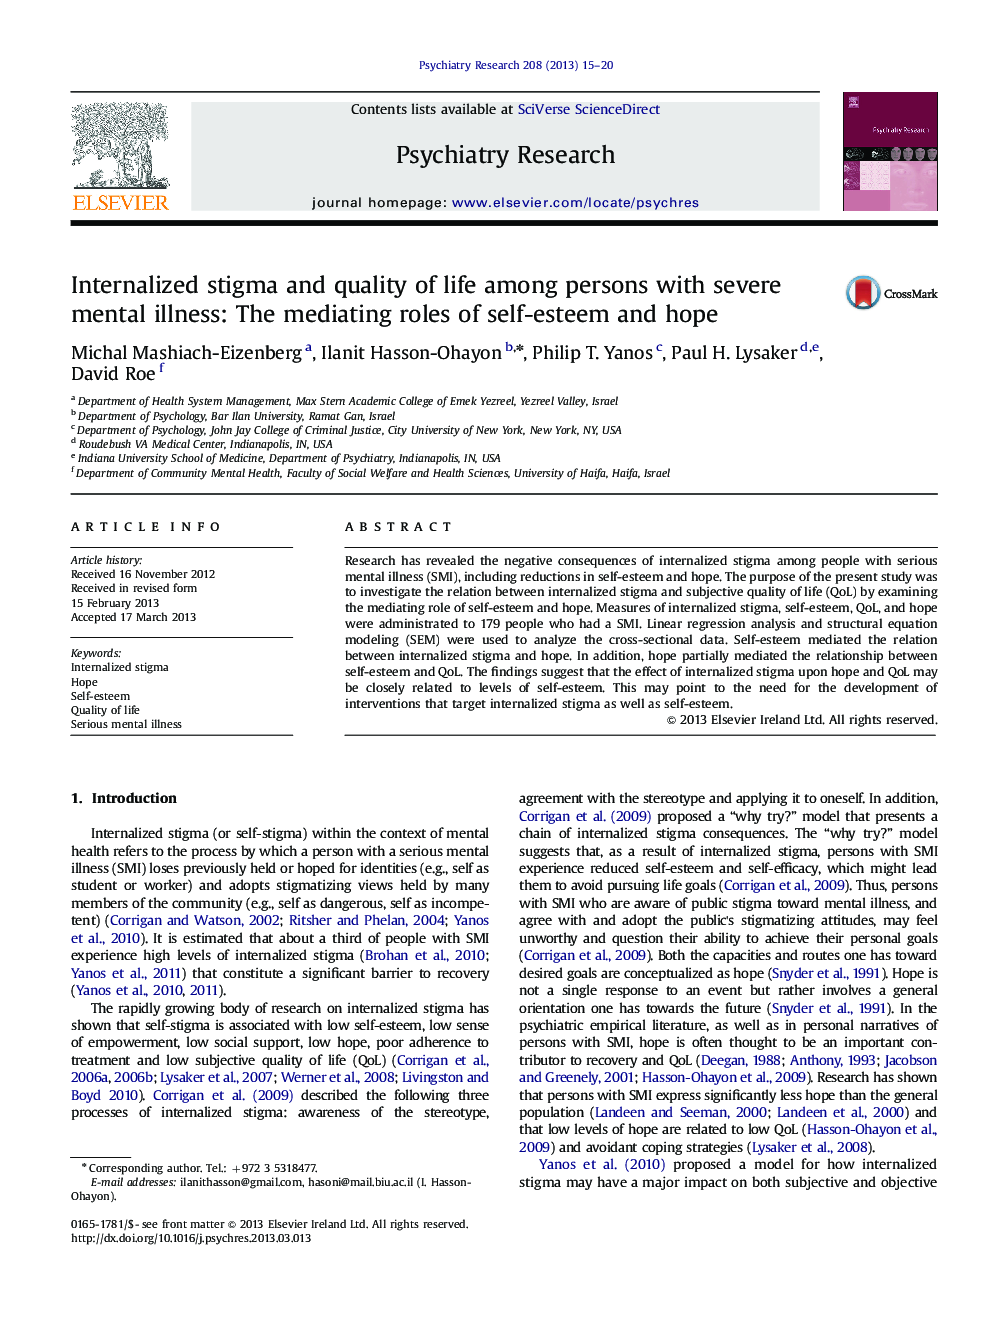 Internalized stigma and quality of life among persons with severe mental illness: The mediating roles of self-esteem and hope